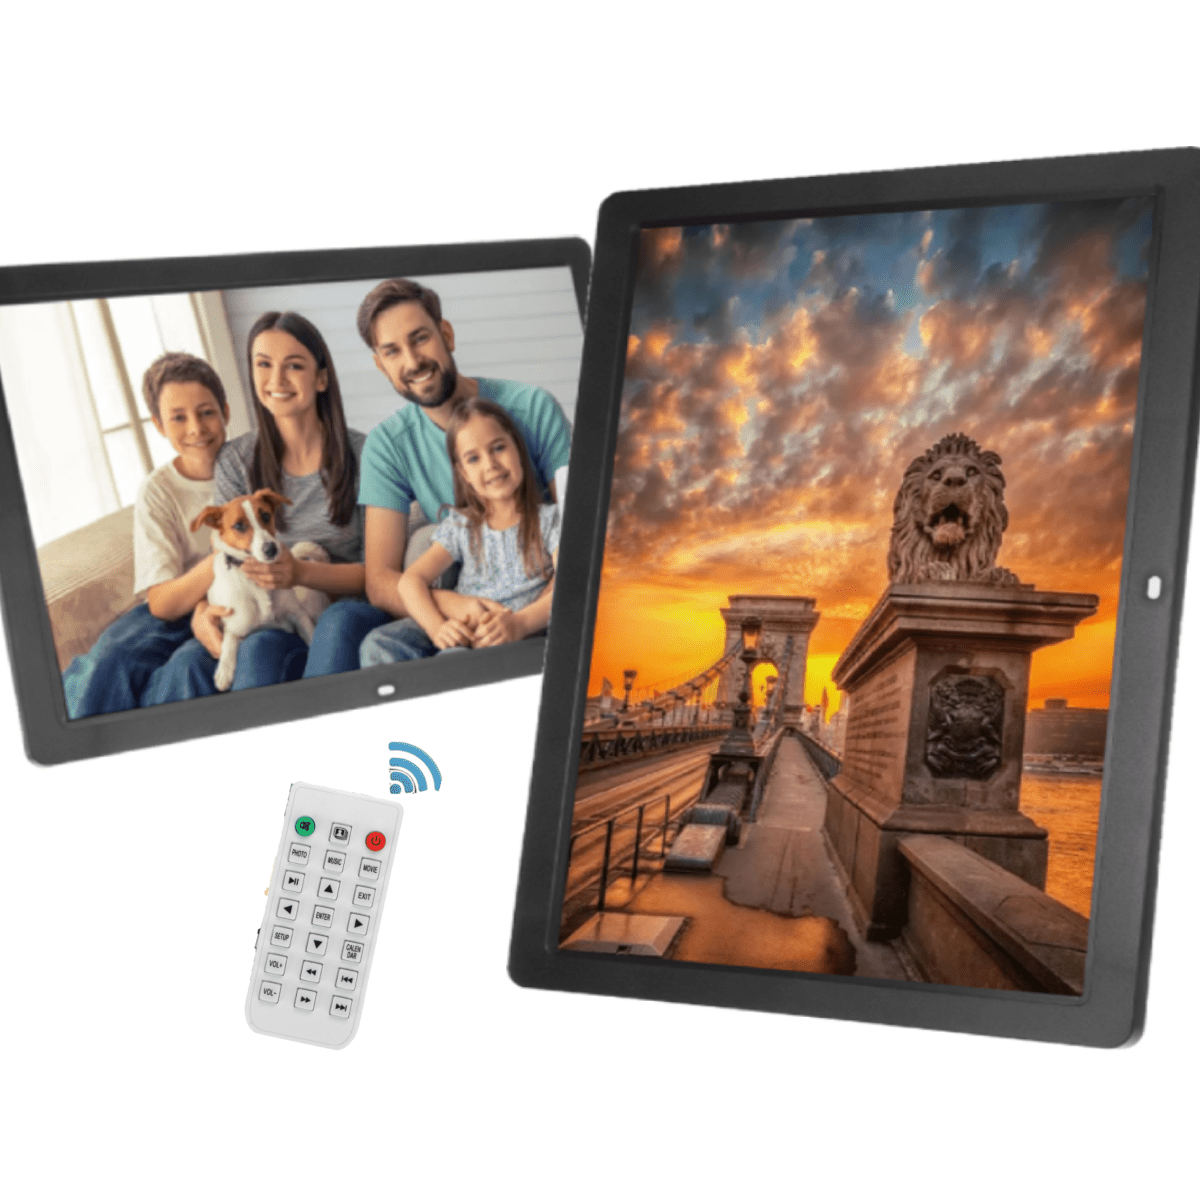 Digital photo Frame 10 inch Wide Screen High Resolution Picture/Music/Video Frame Digital Picture Frame Clock & Calendar with Remote Control support USB/SD Card Electronic photo Frame